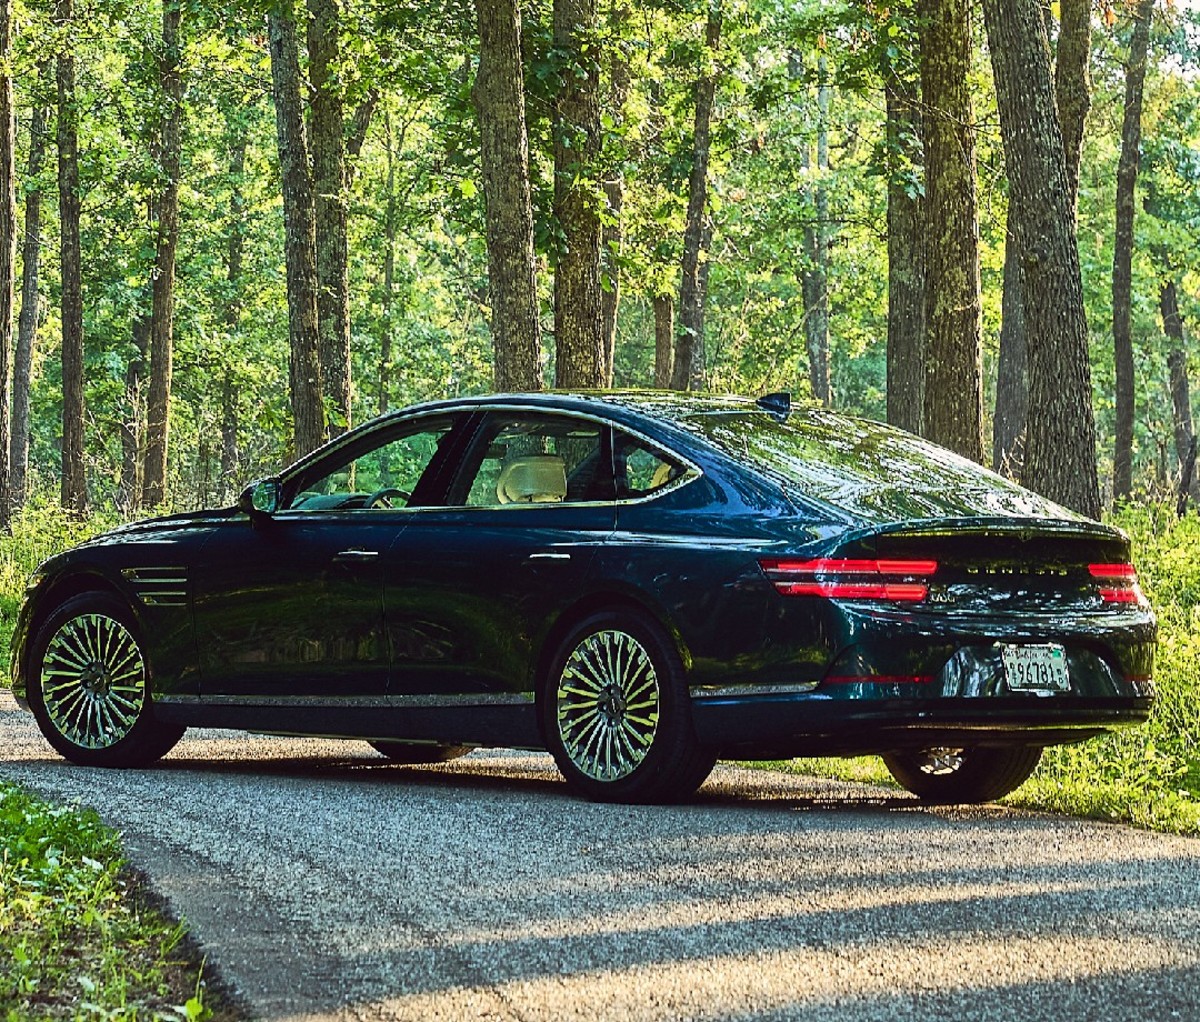 The Genesis Electrified G80 parked on a road in the woods.